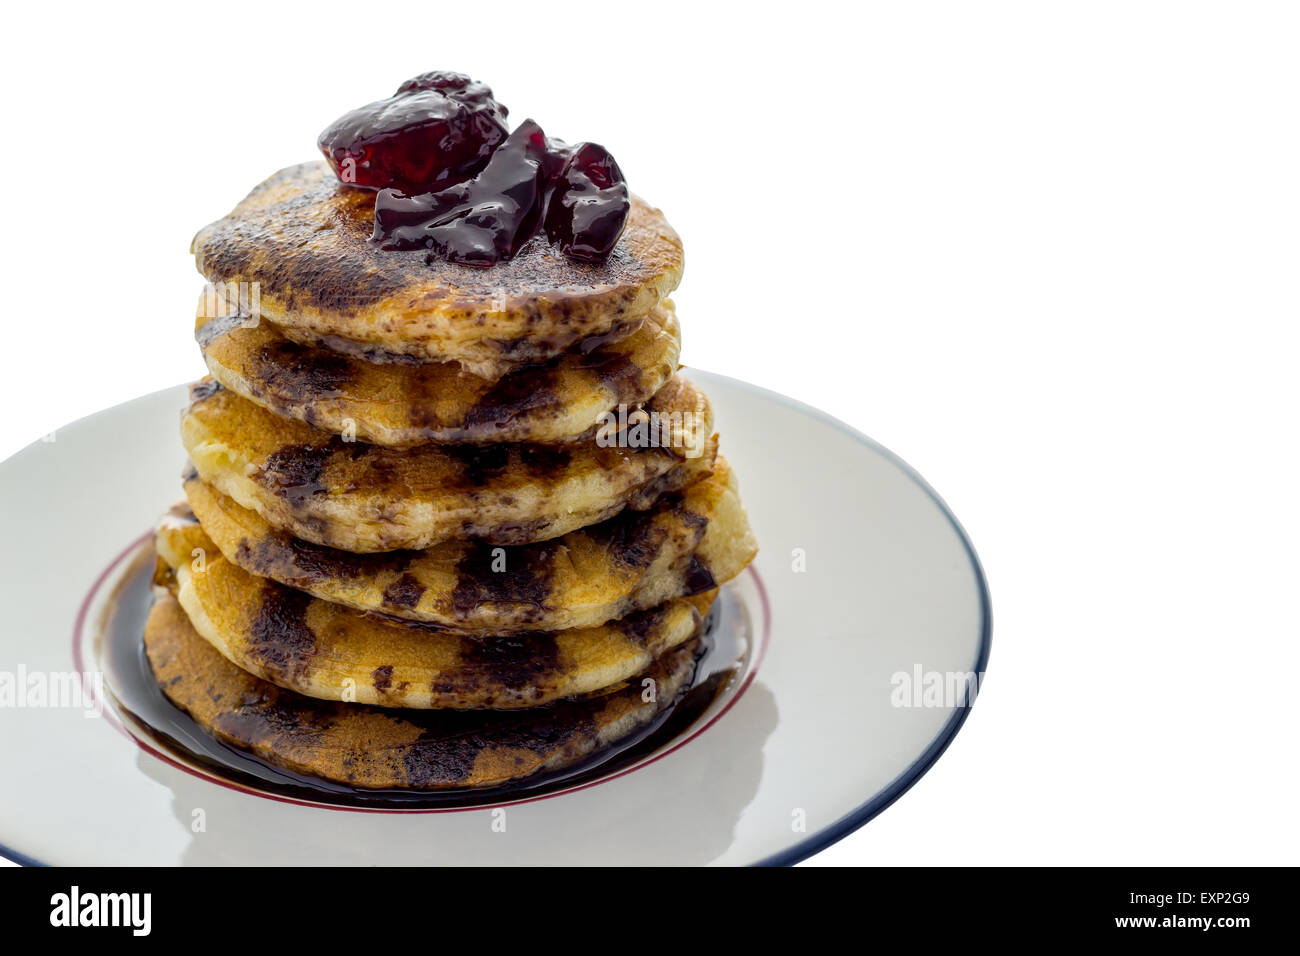 Pancakes with jelly toping on white saucer Stock Photo